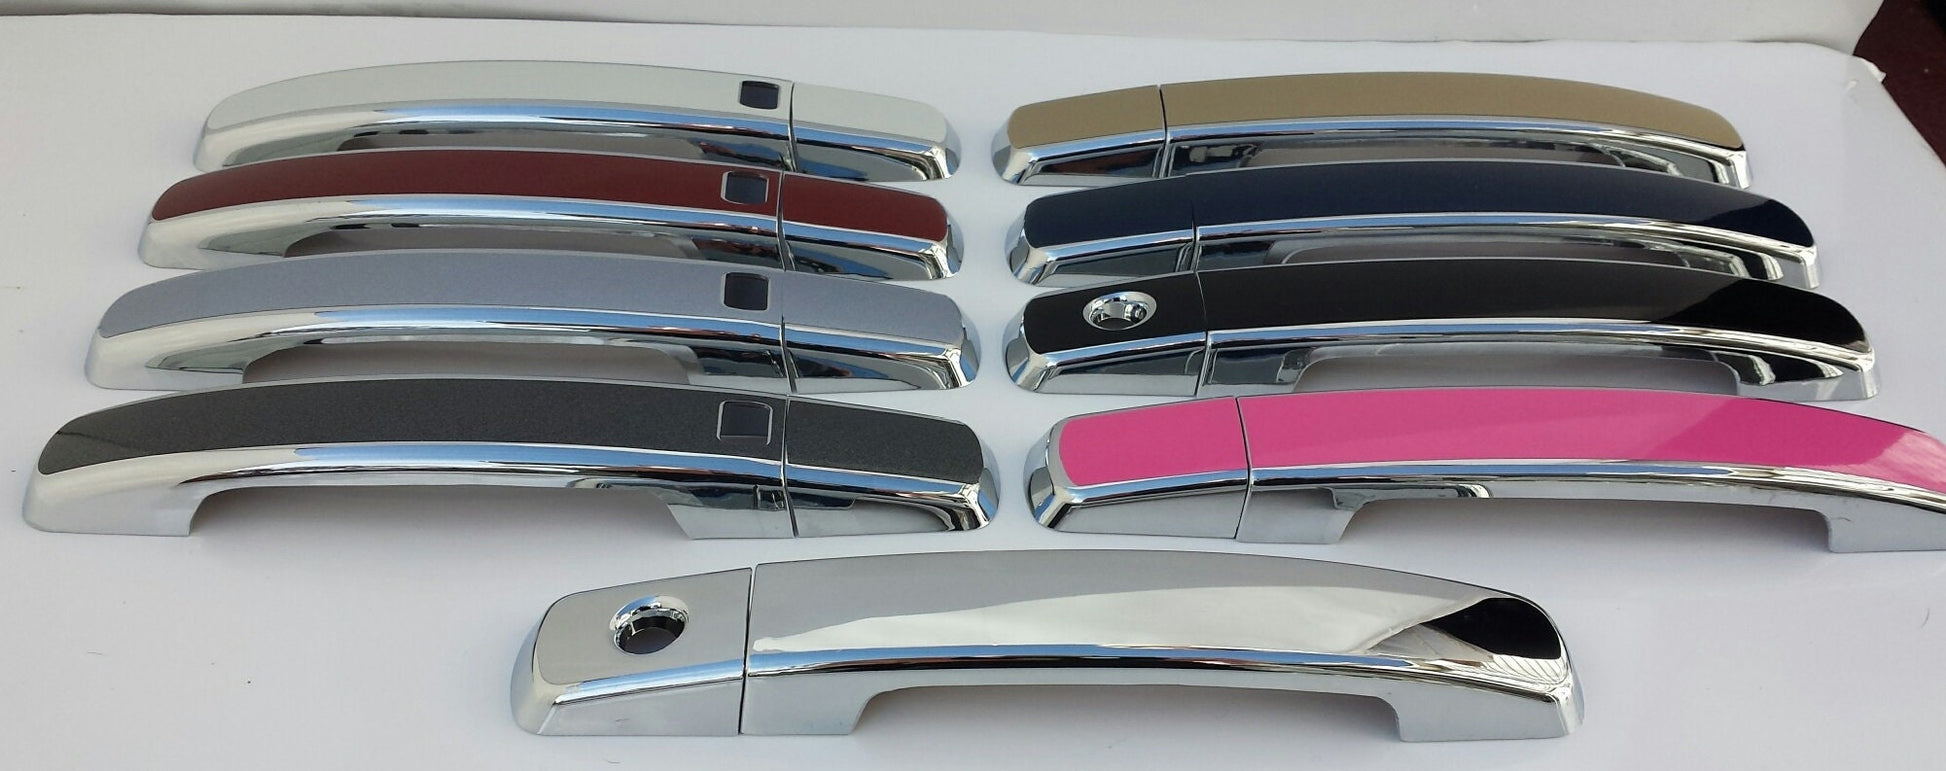 Full Set of Custom Black OR Chrome Door Handle Overlays / Covers For the 2007 - 2012 Nissan Altima  - Choose the Color of the Middle Insert